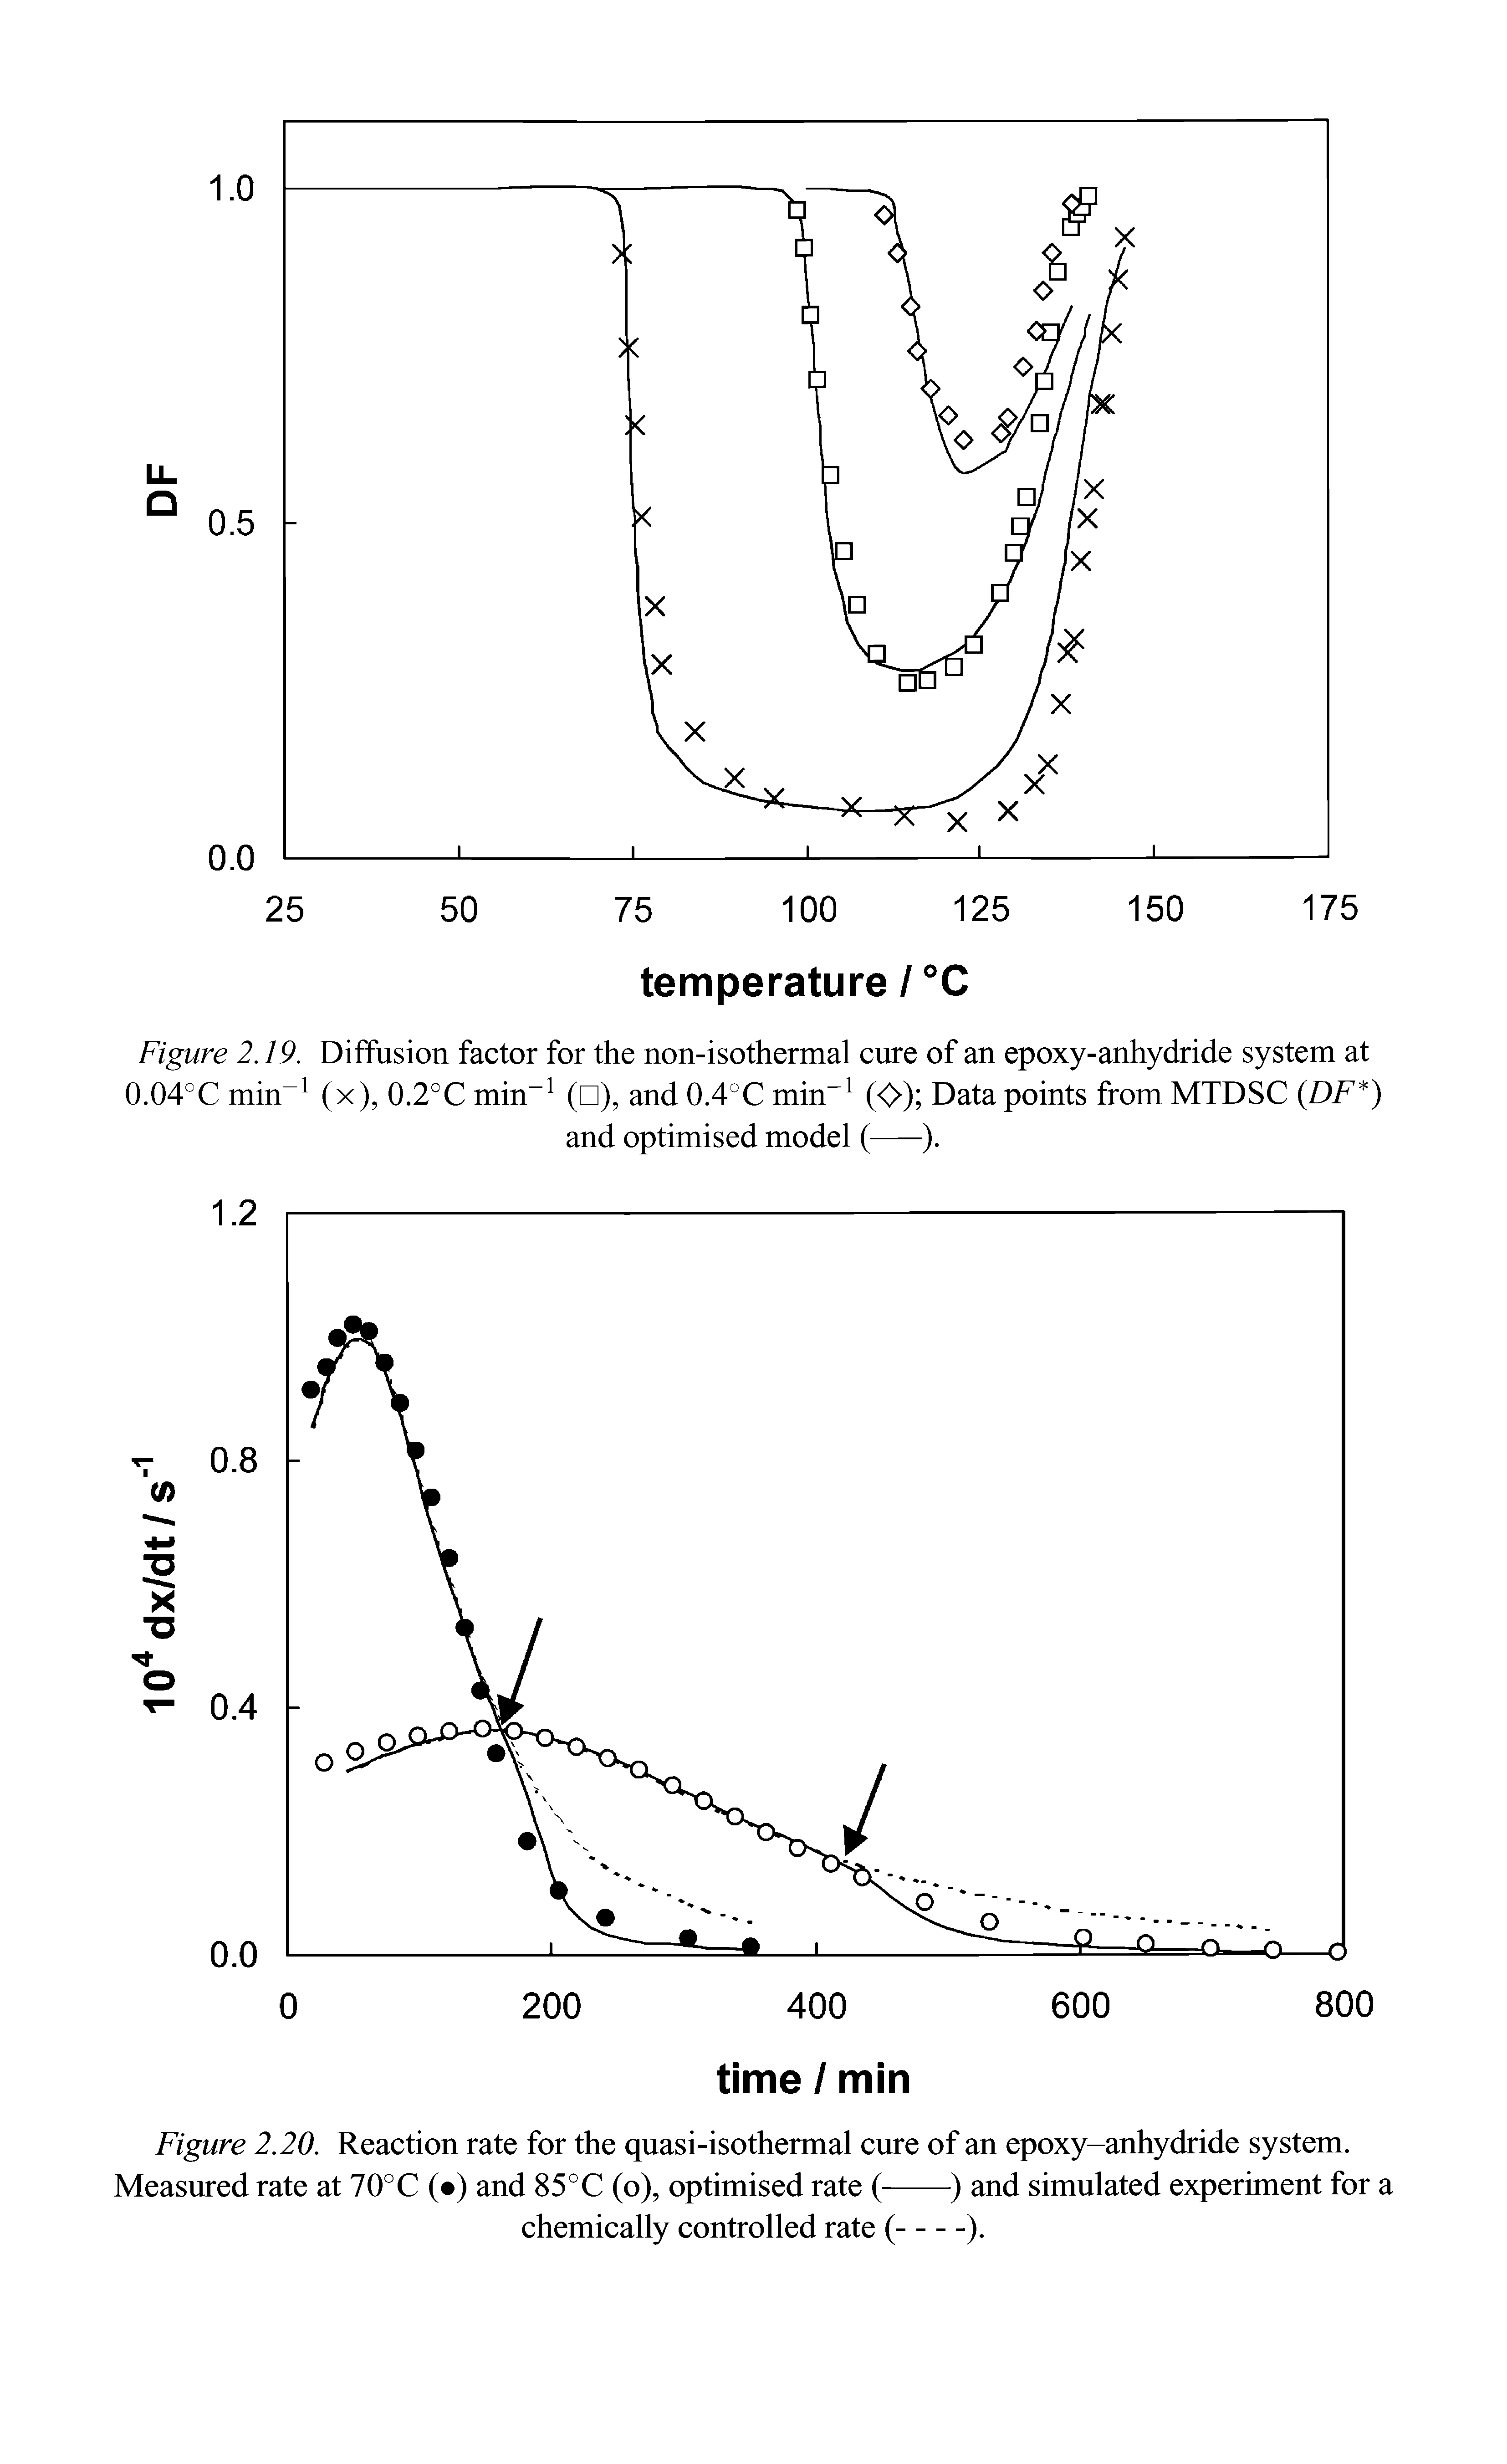 Figure 2.20. Reaction rate for the quasi-isothermal cure of an epoxy-anhydride system.